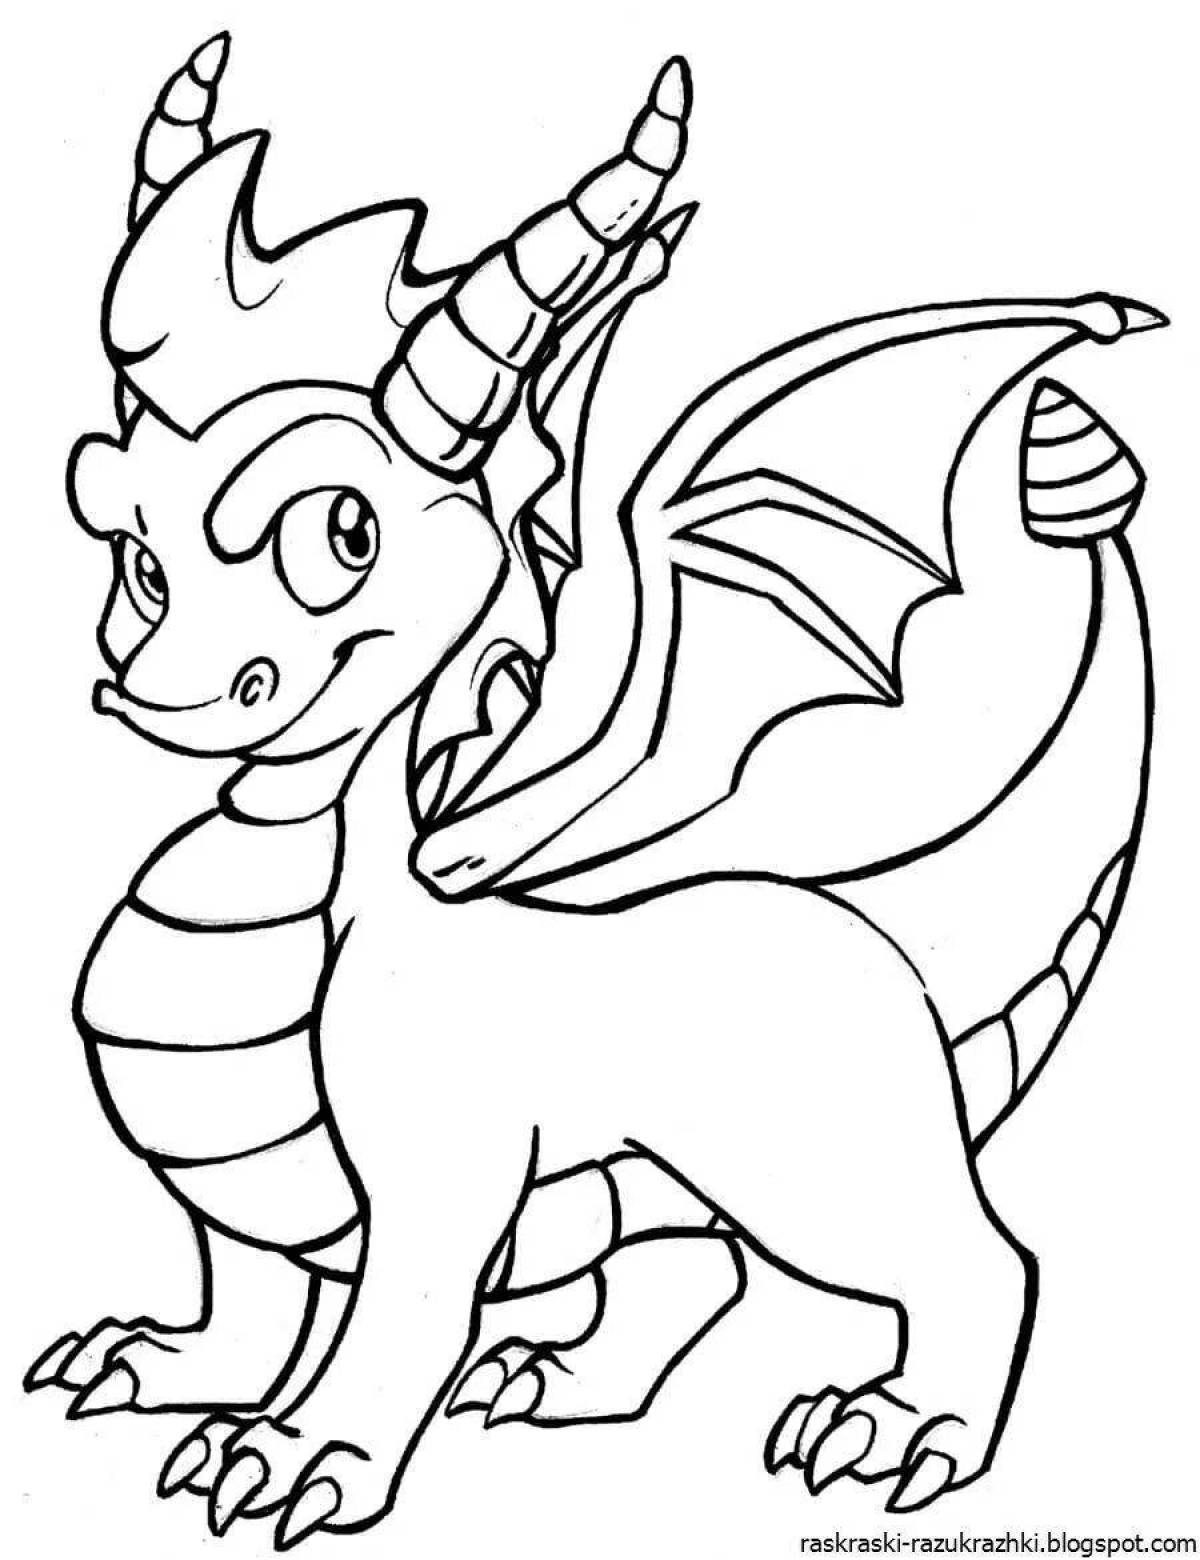 Dragon coloring book for children 4-5 years old